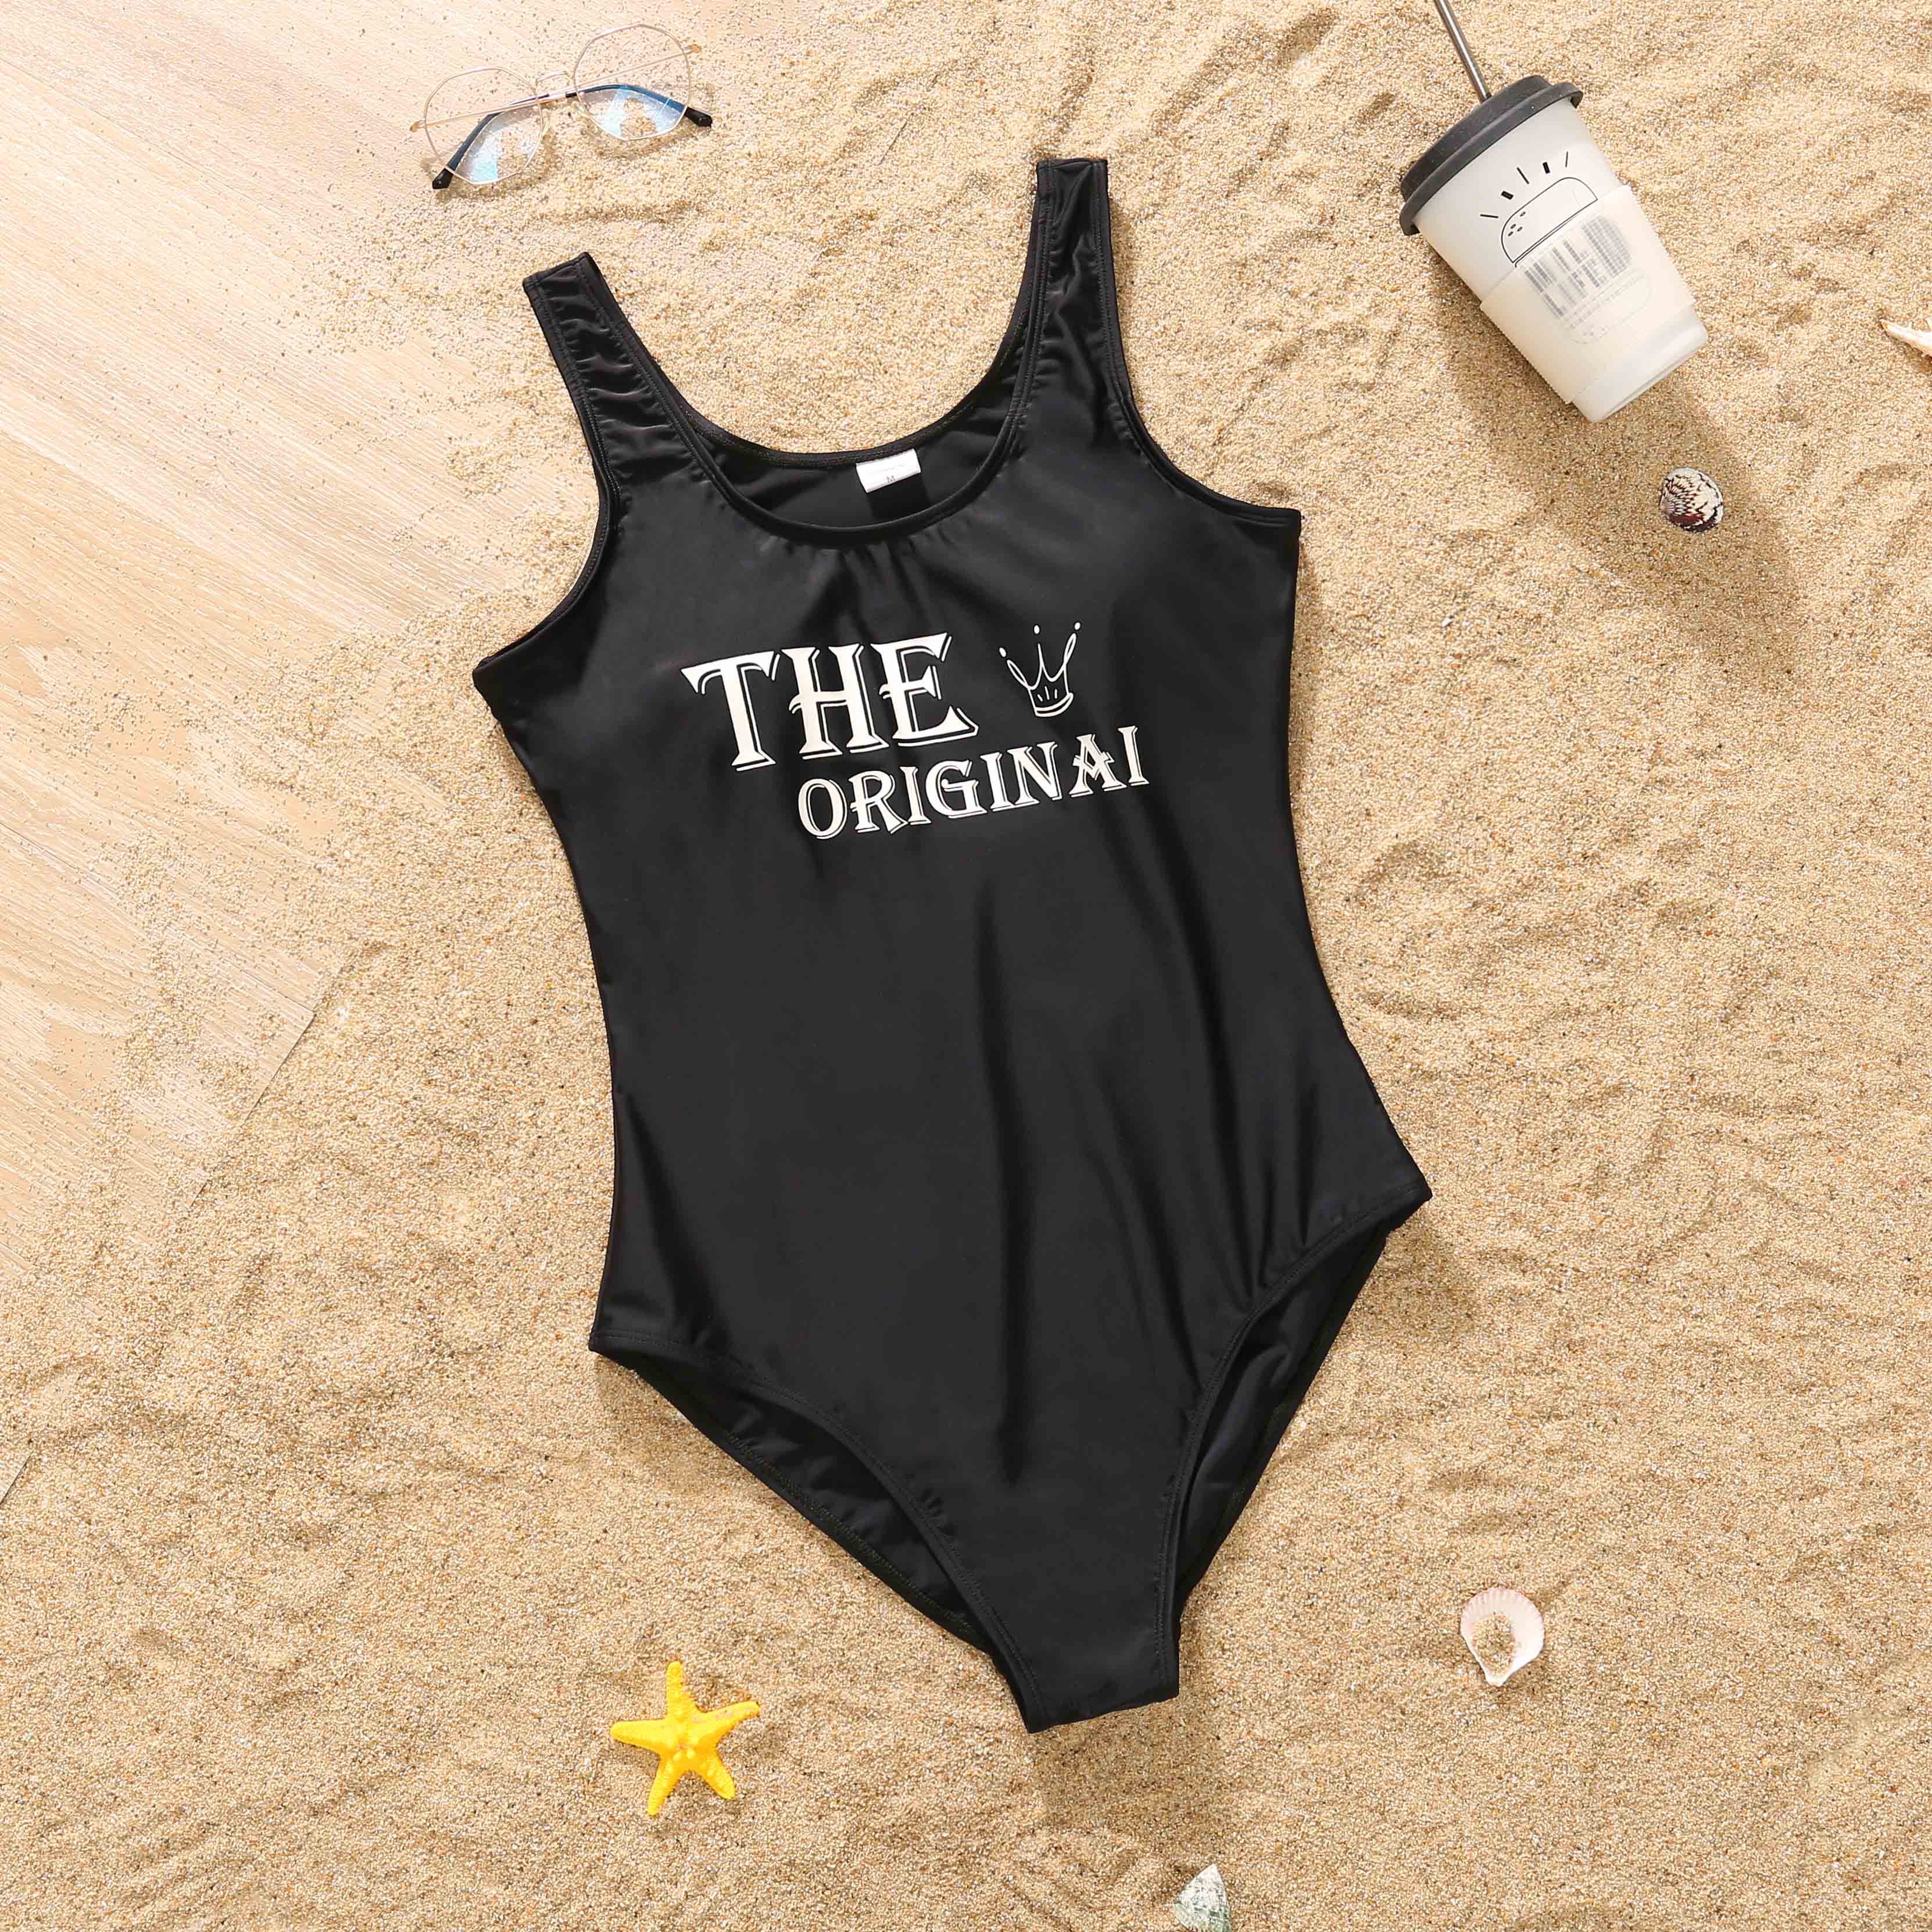 Family Matching Swimwear Letter Print Black One Piece Family Bathing Suit